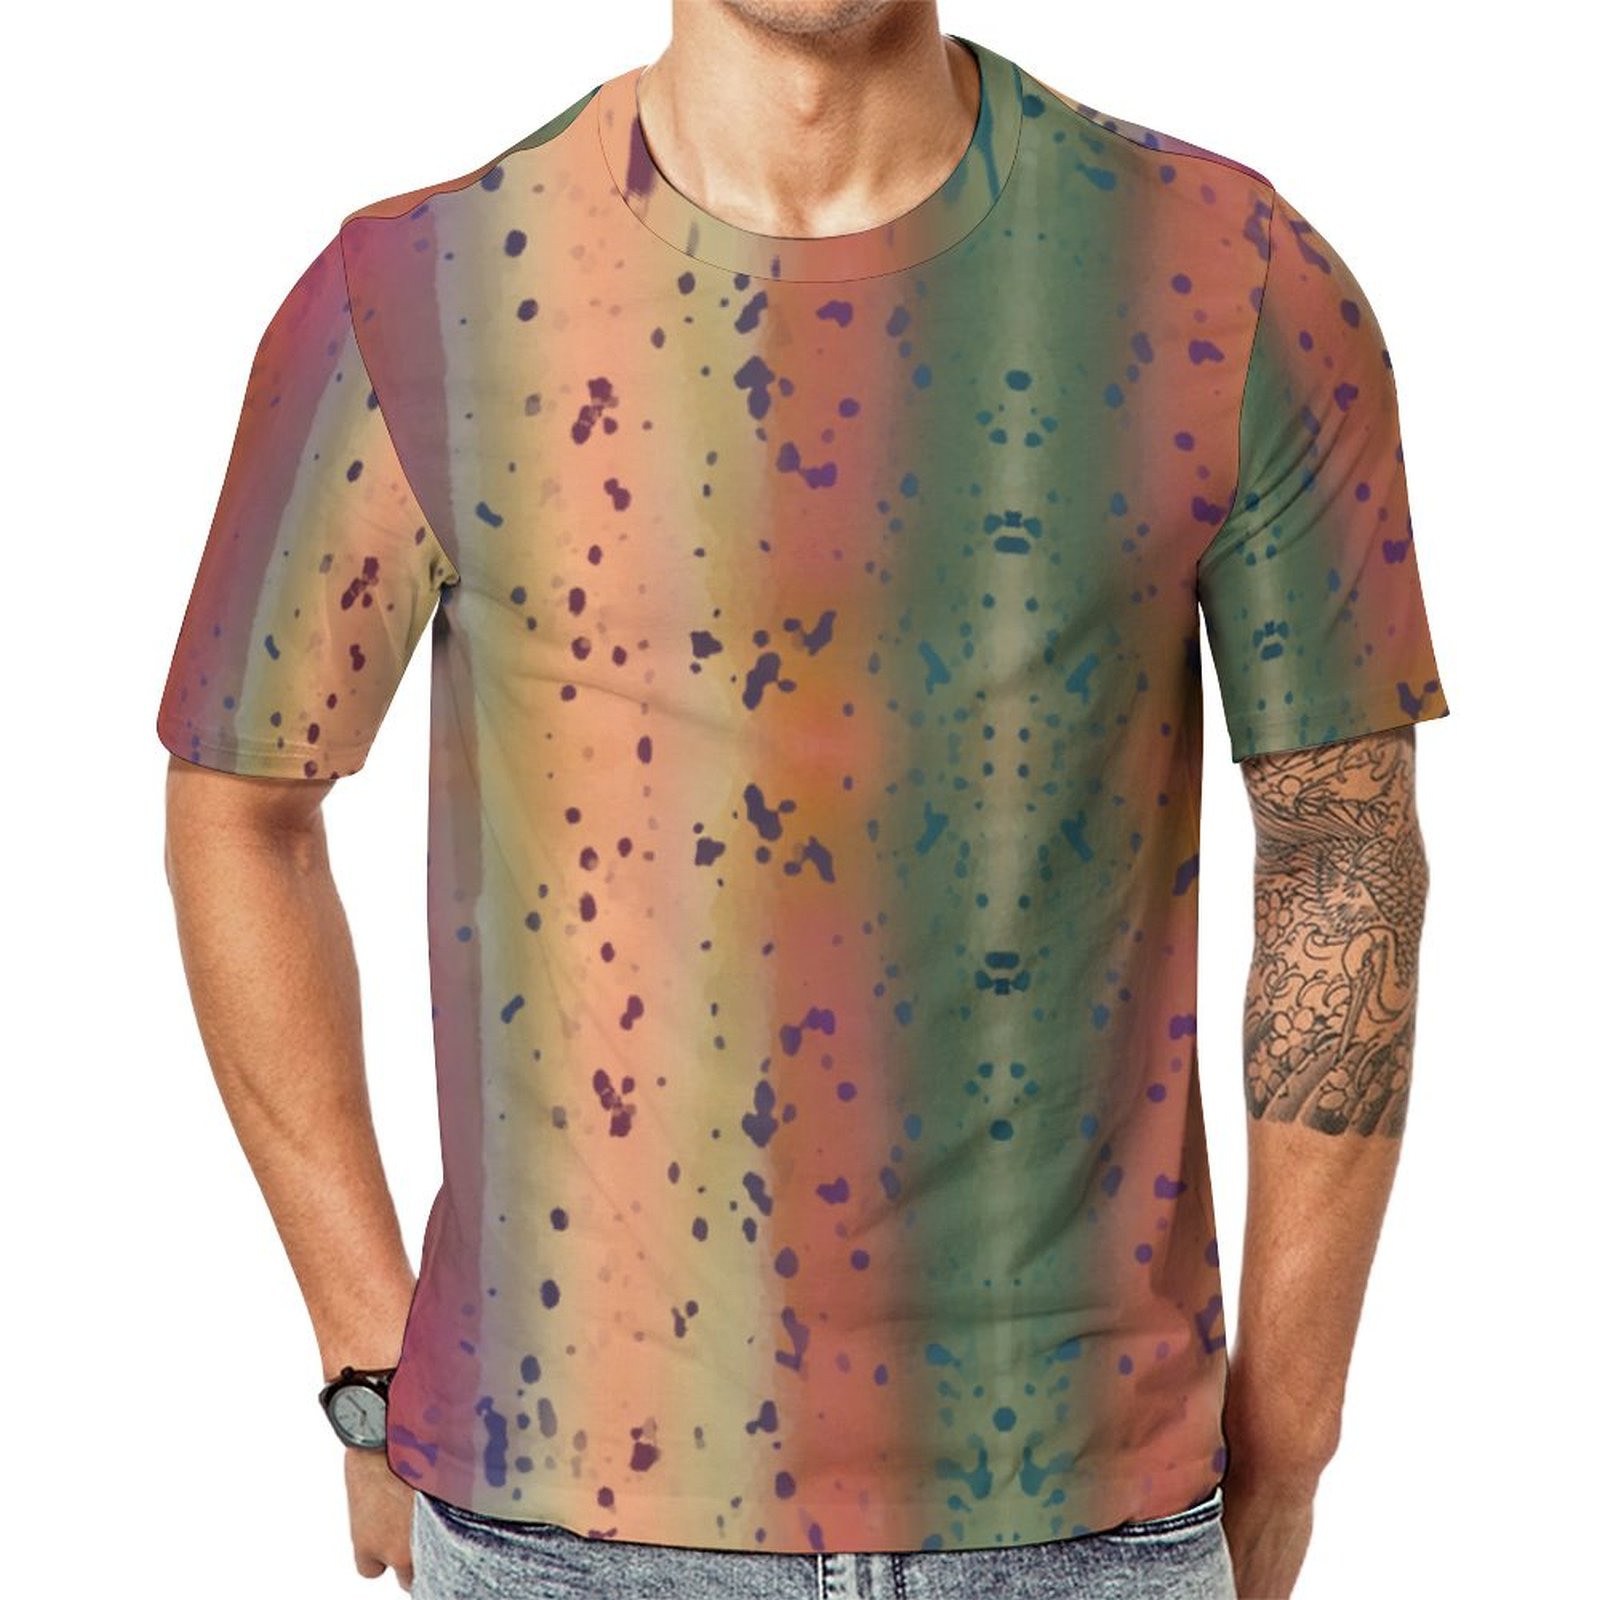 Fun Rainbow Trout Speckled Short Sleeve Print Unisex Tshirt Summer Casual Tees for Men and Women Coolcoshirts